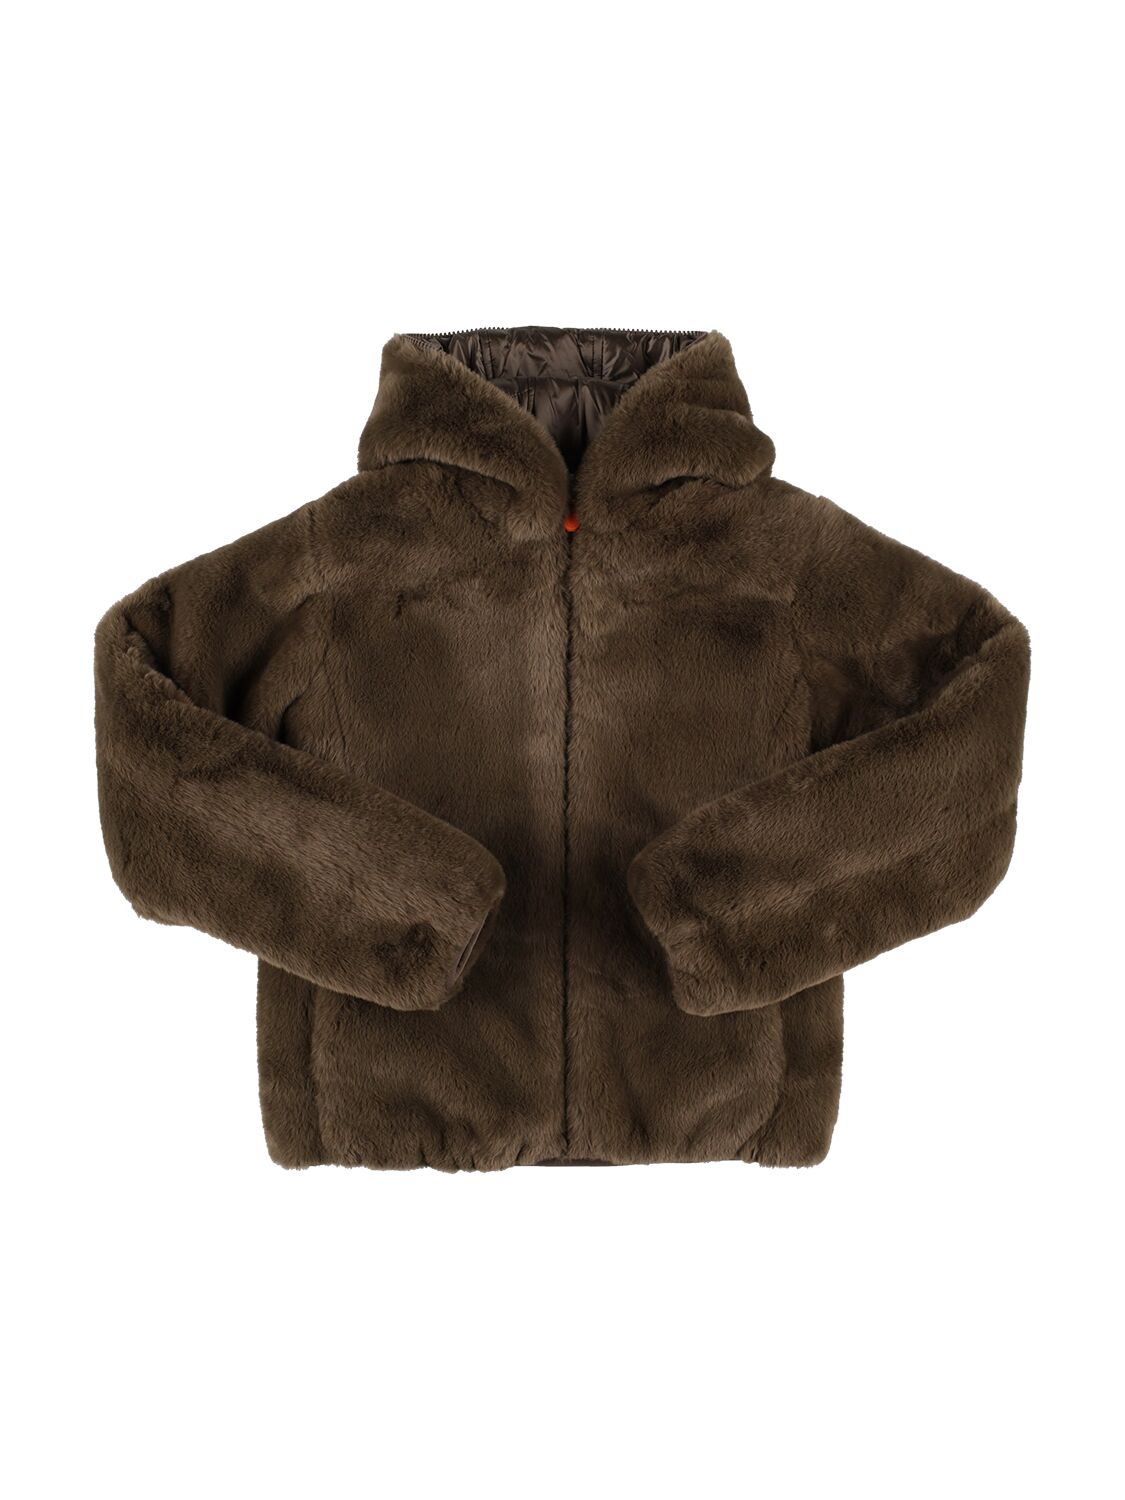 Image of Reversible Faux Fur & Recycled Jacket